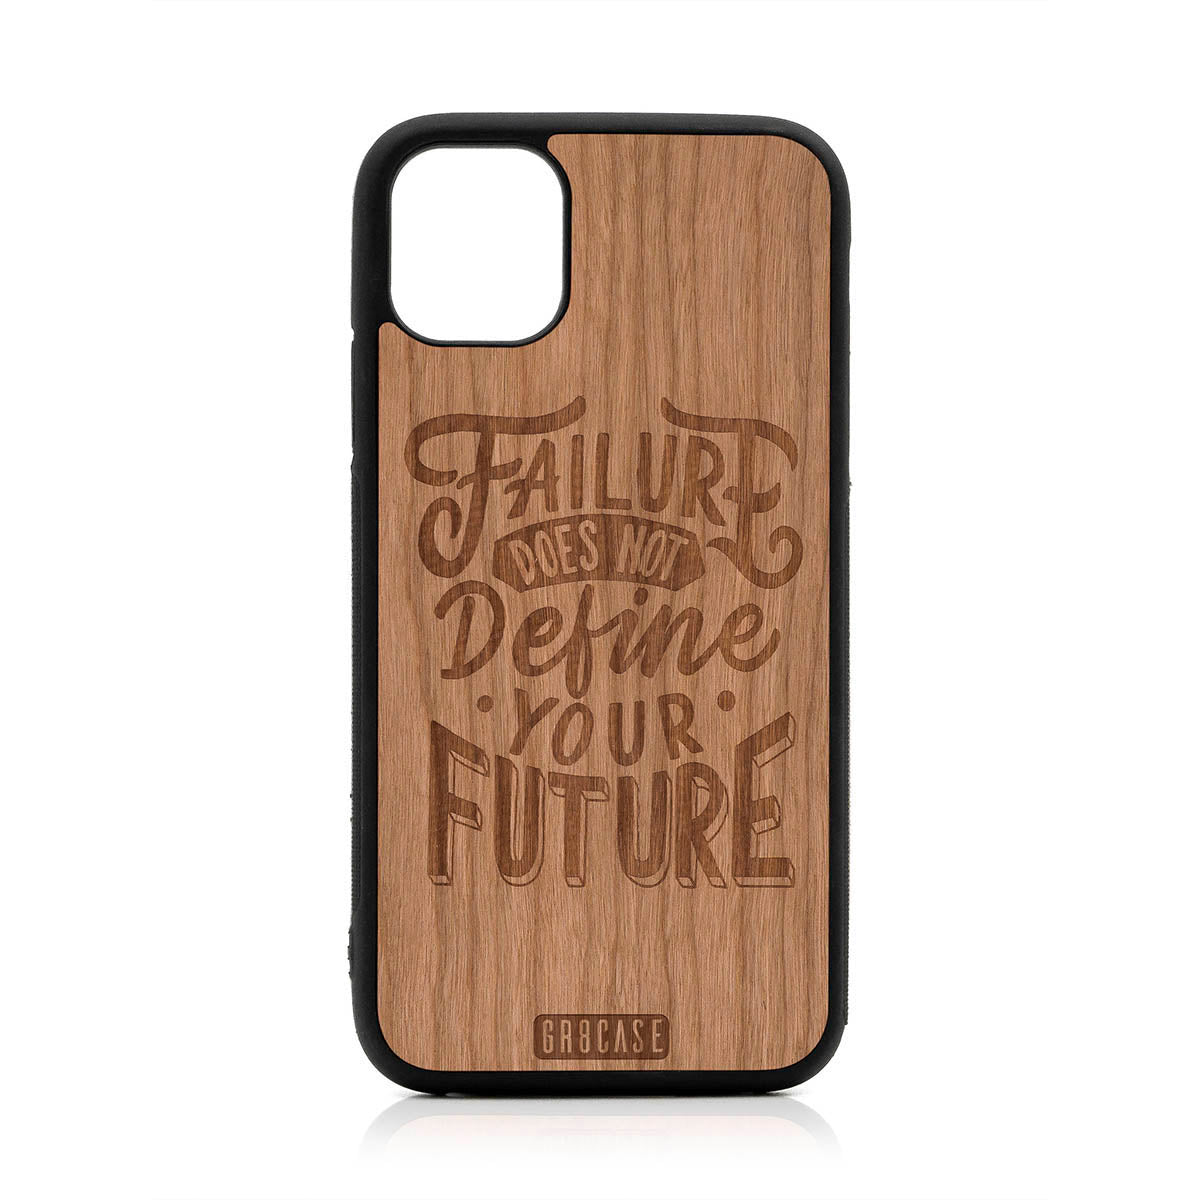 Failure Does Not Define You Future Design Wood Case For iPhone 11 by GR8CASE